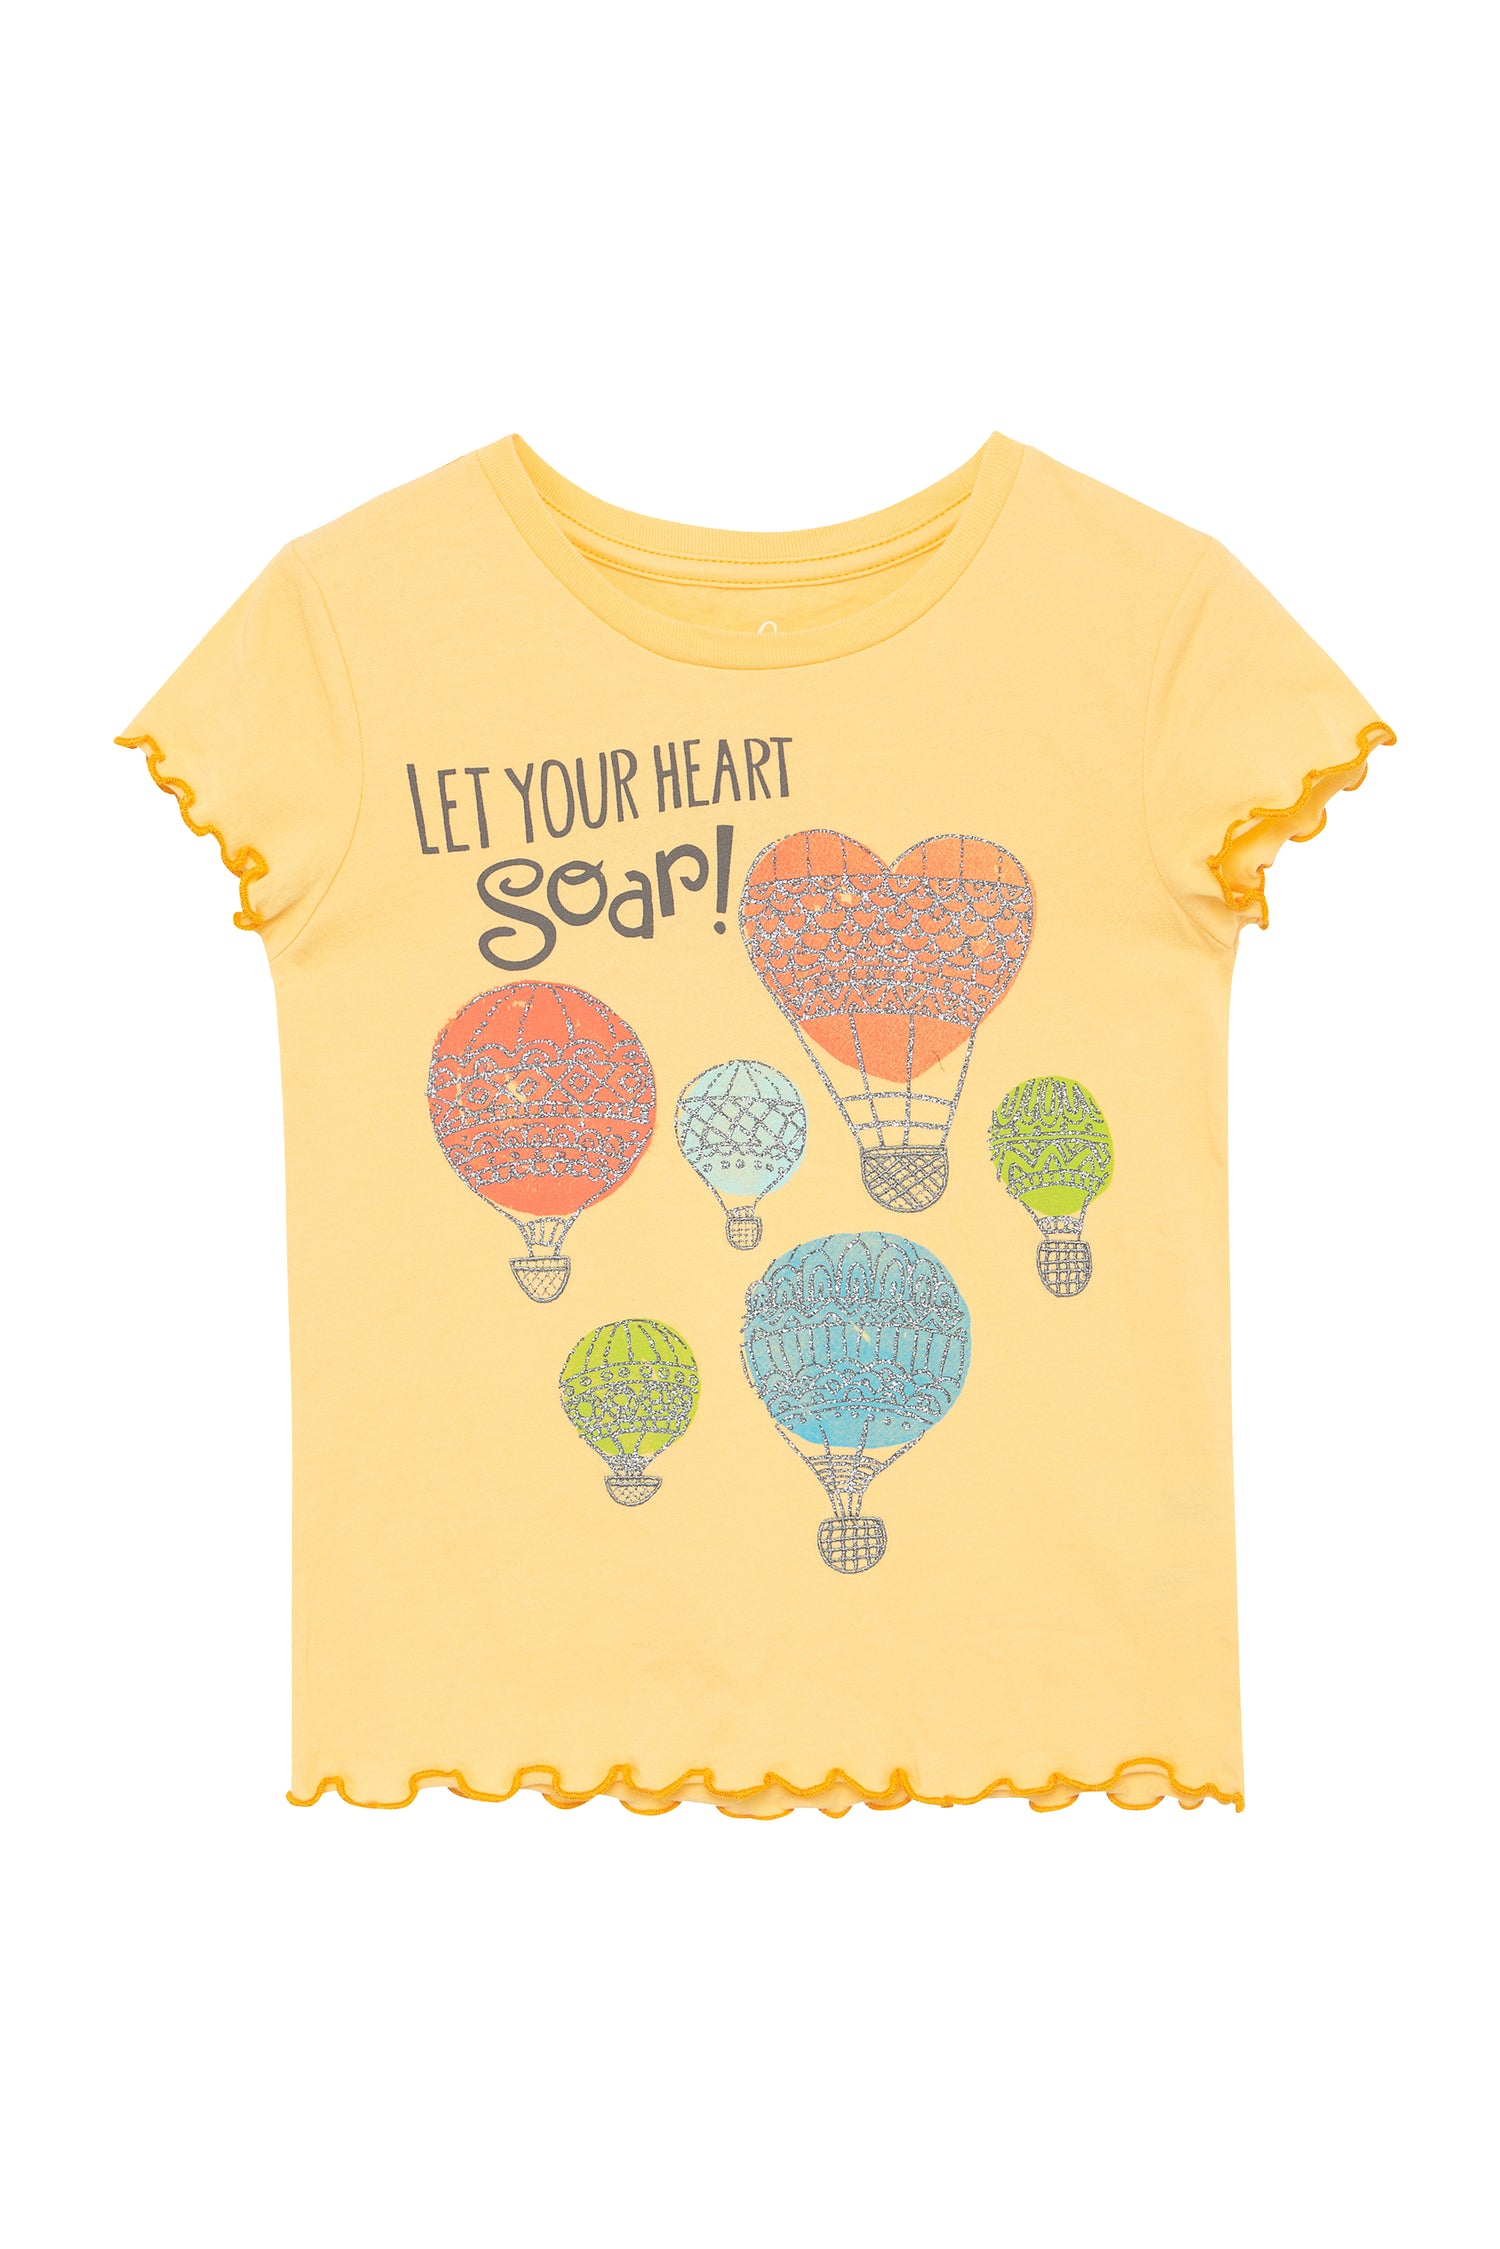 Front view of yellow shirt with hot air balloon image and "let your heart soar"